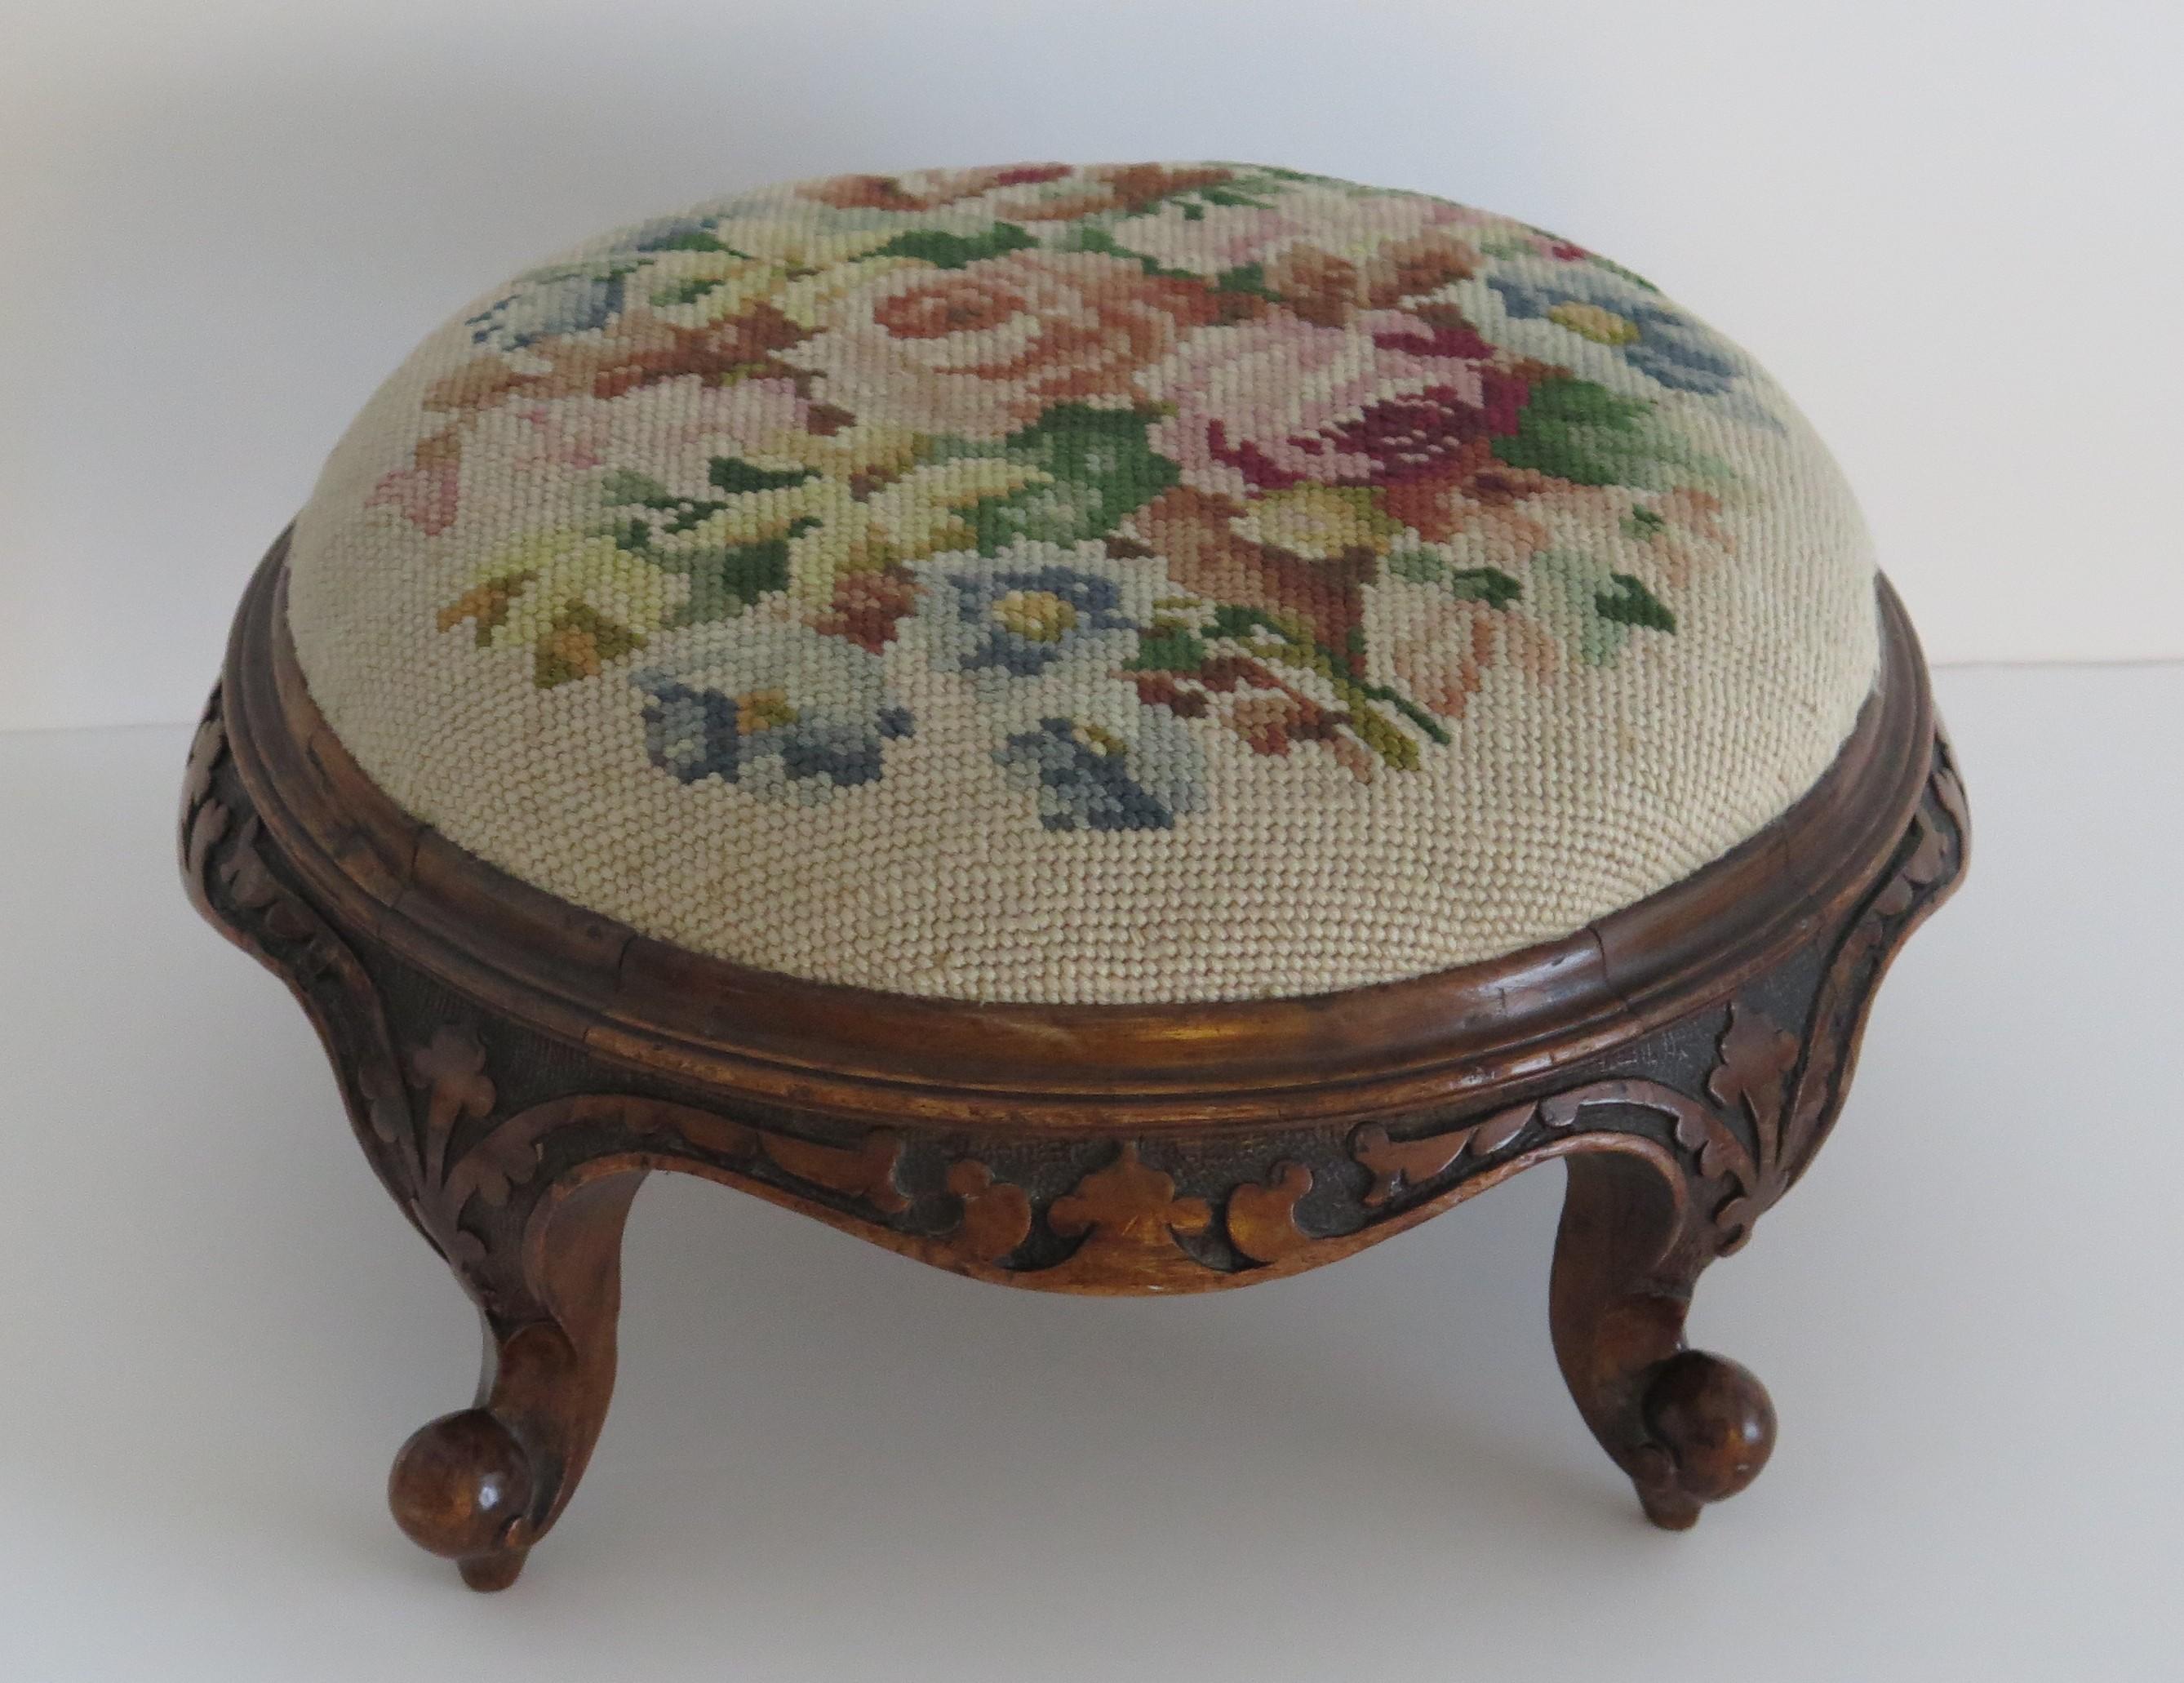 British Foot Stool Early Victorian Carved Walnut with Wool-Work Top, English, Circa 1850 For Sale